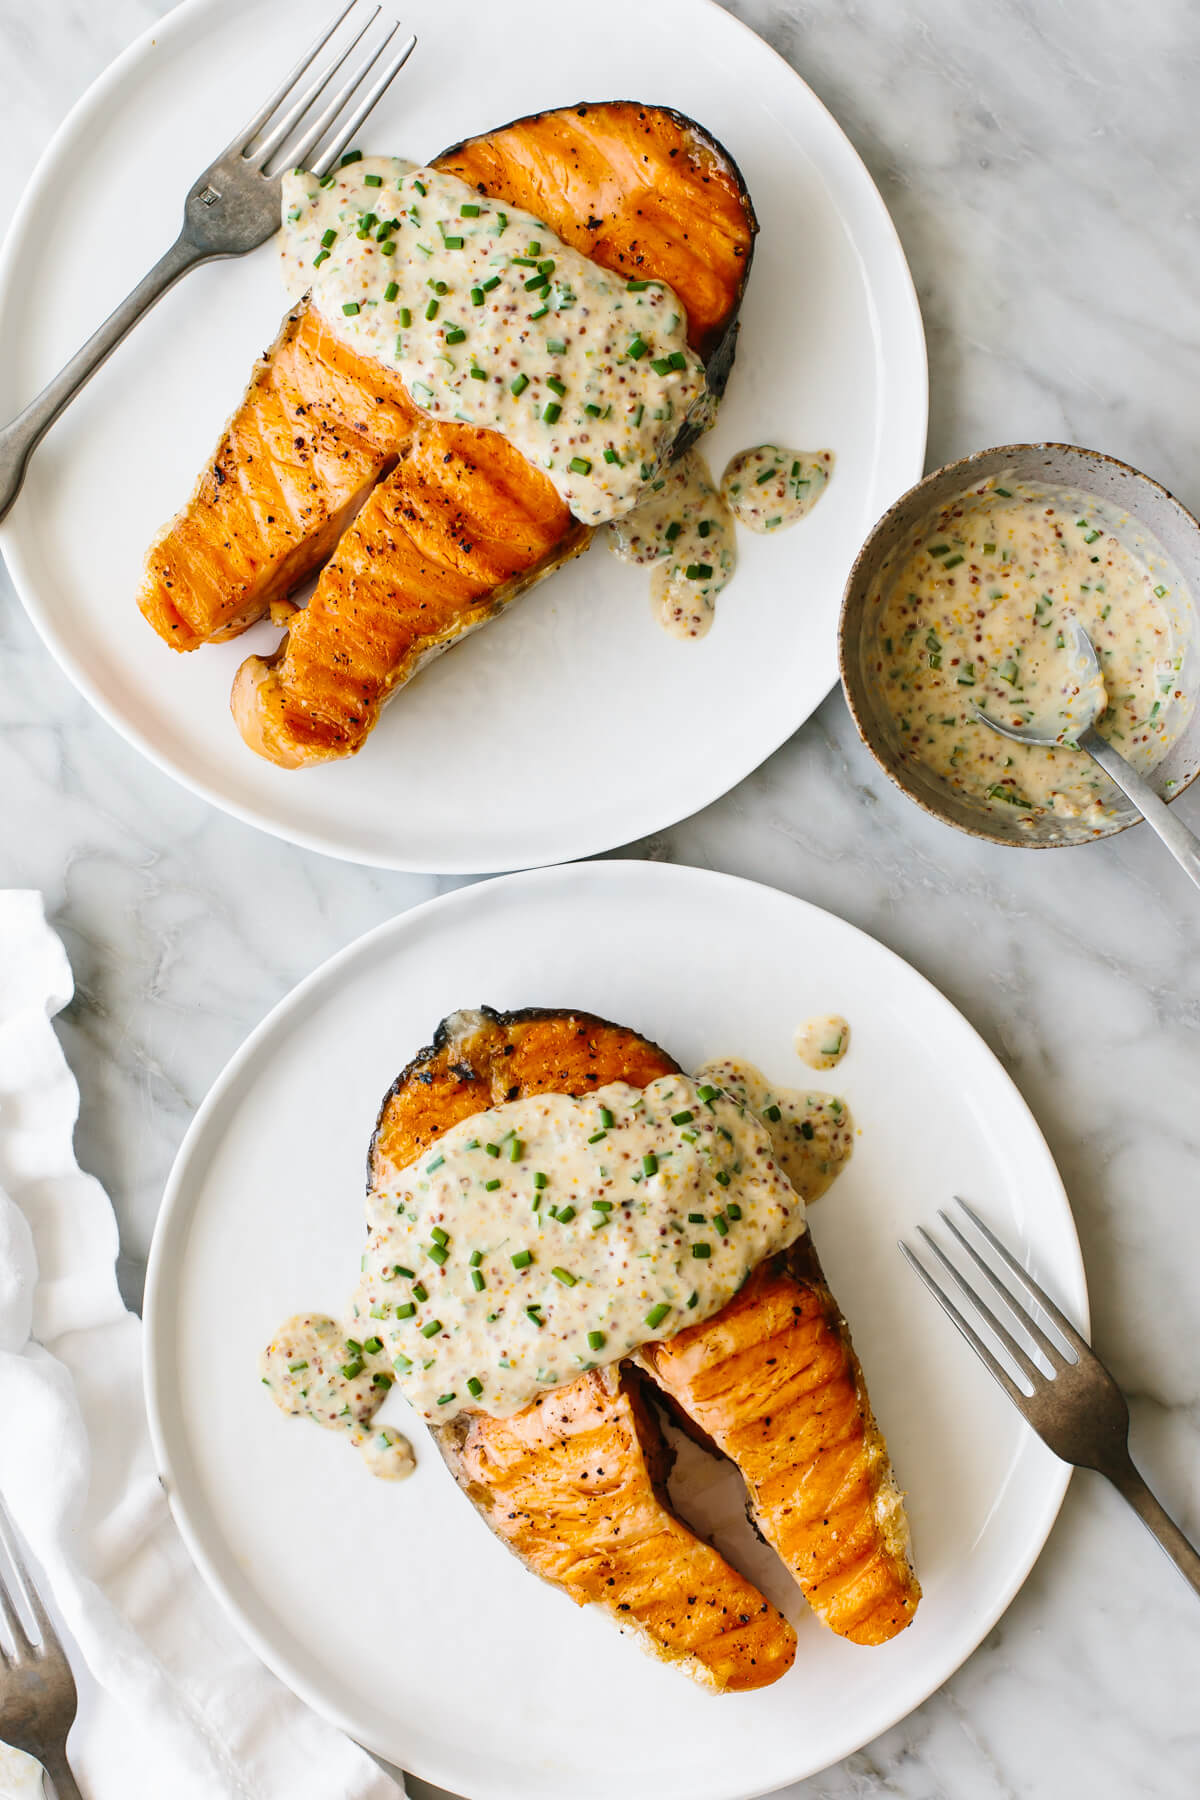 Grilled salmon steaks on two white plates